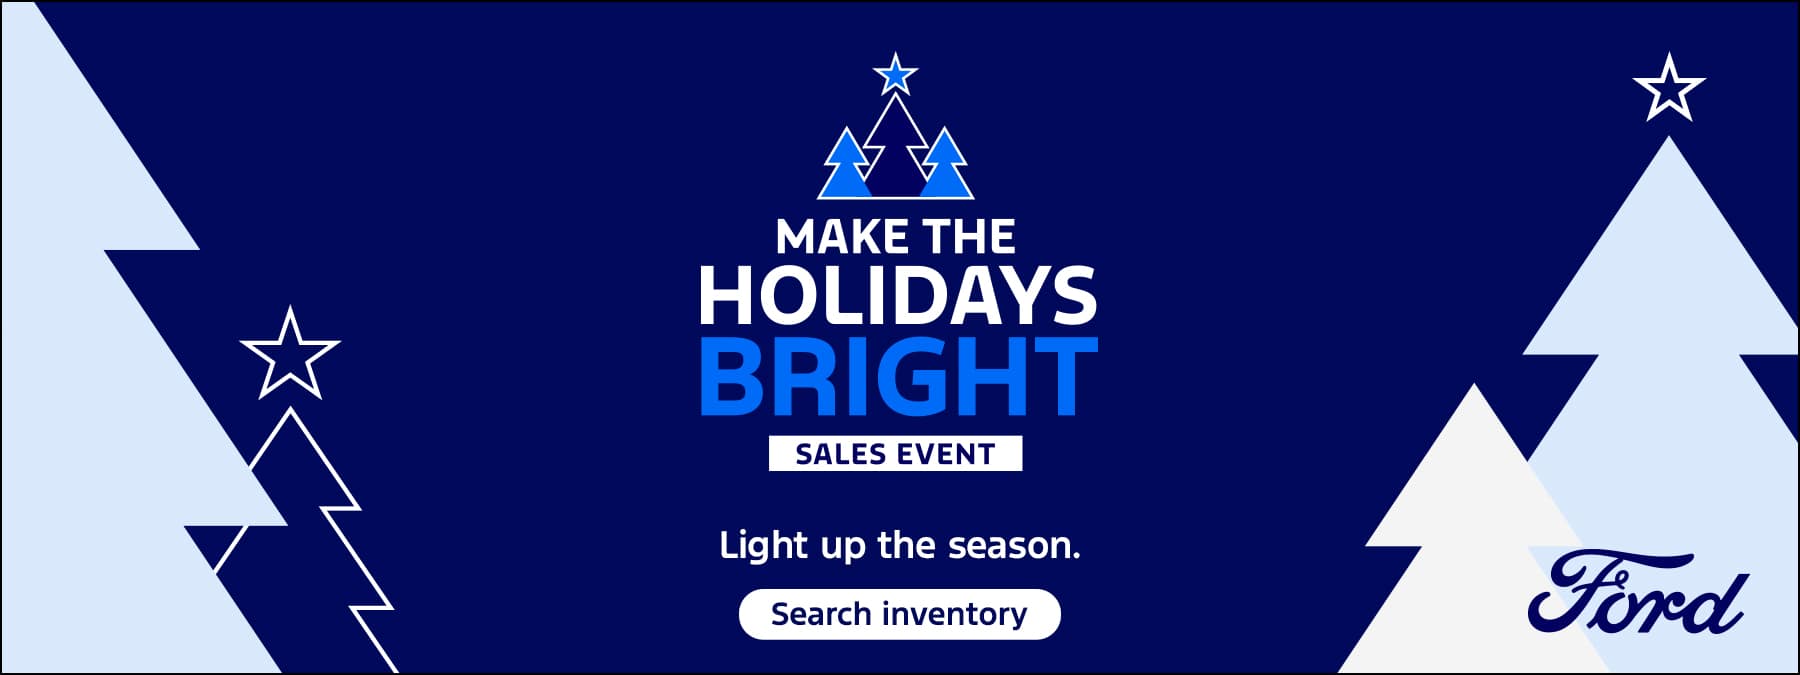 Make The Holidays Bright Sales Event